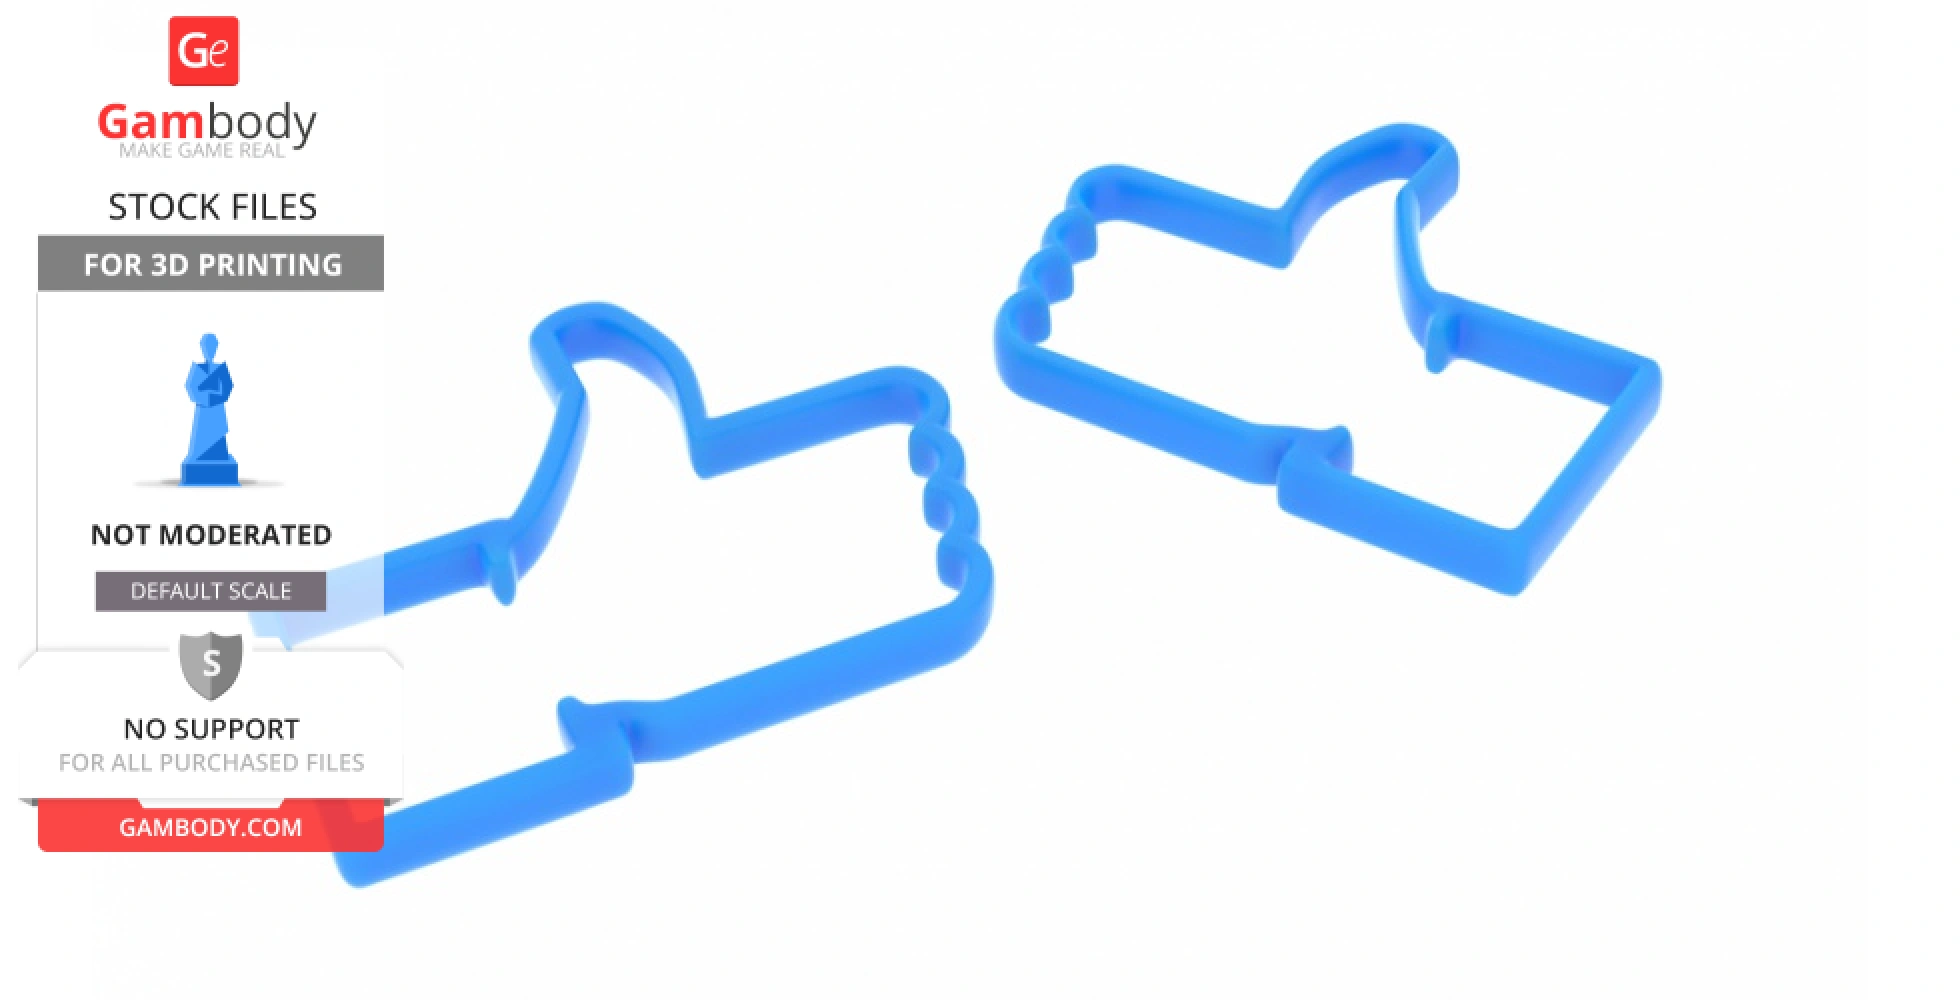 Buy Facebook Cookie Cutter Form